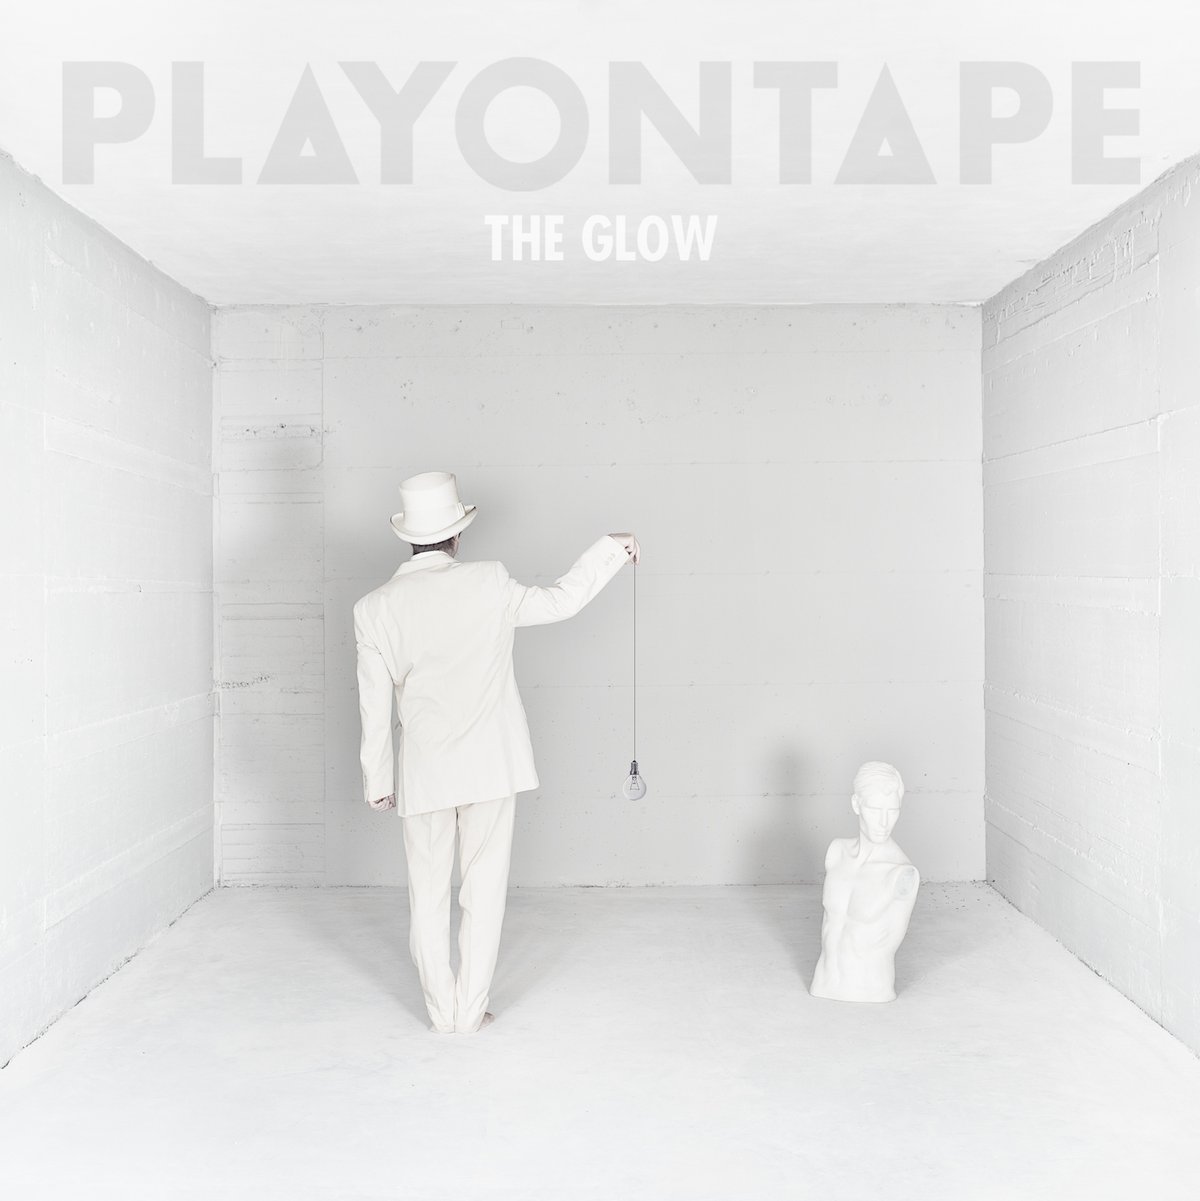 Image of PLAYONTAPE - The Glow